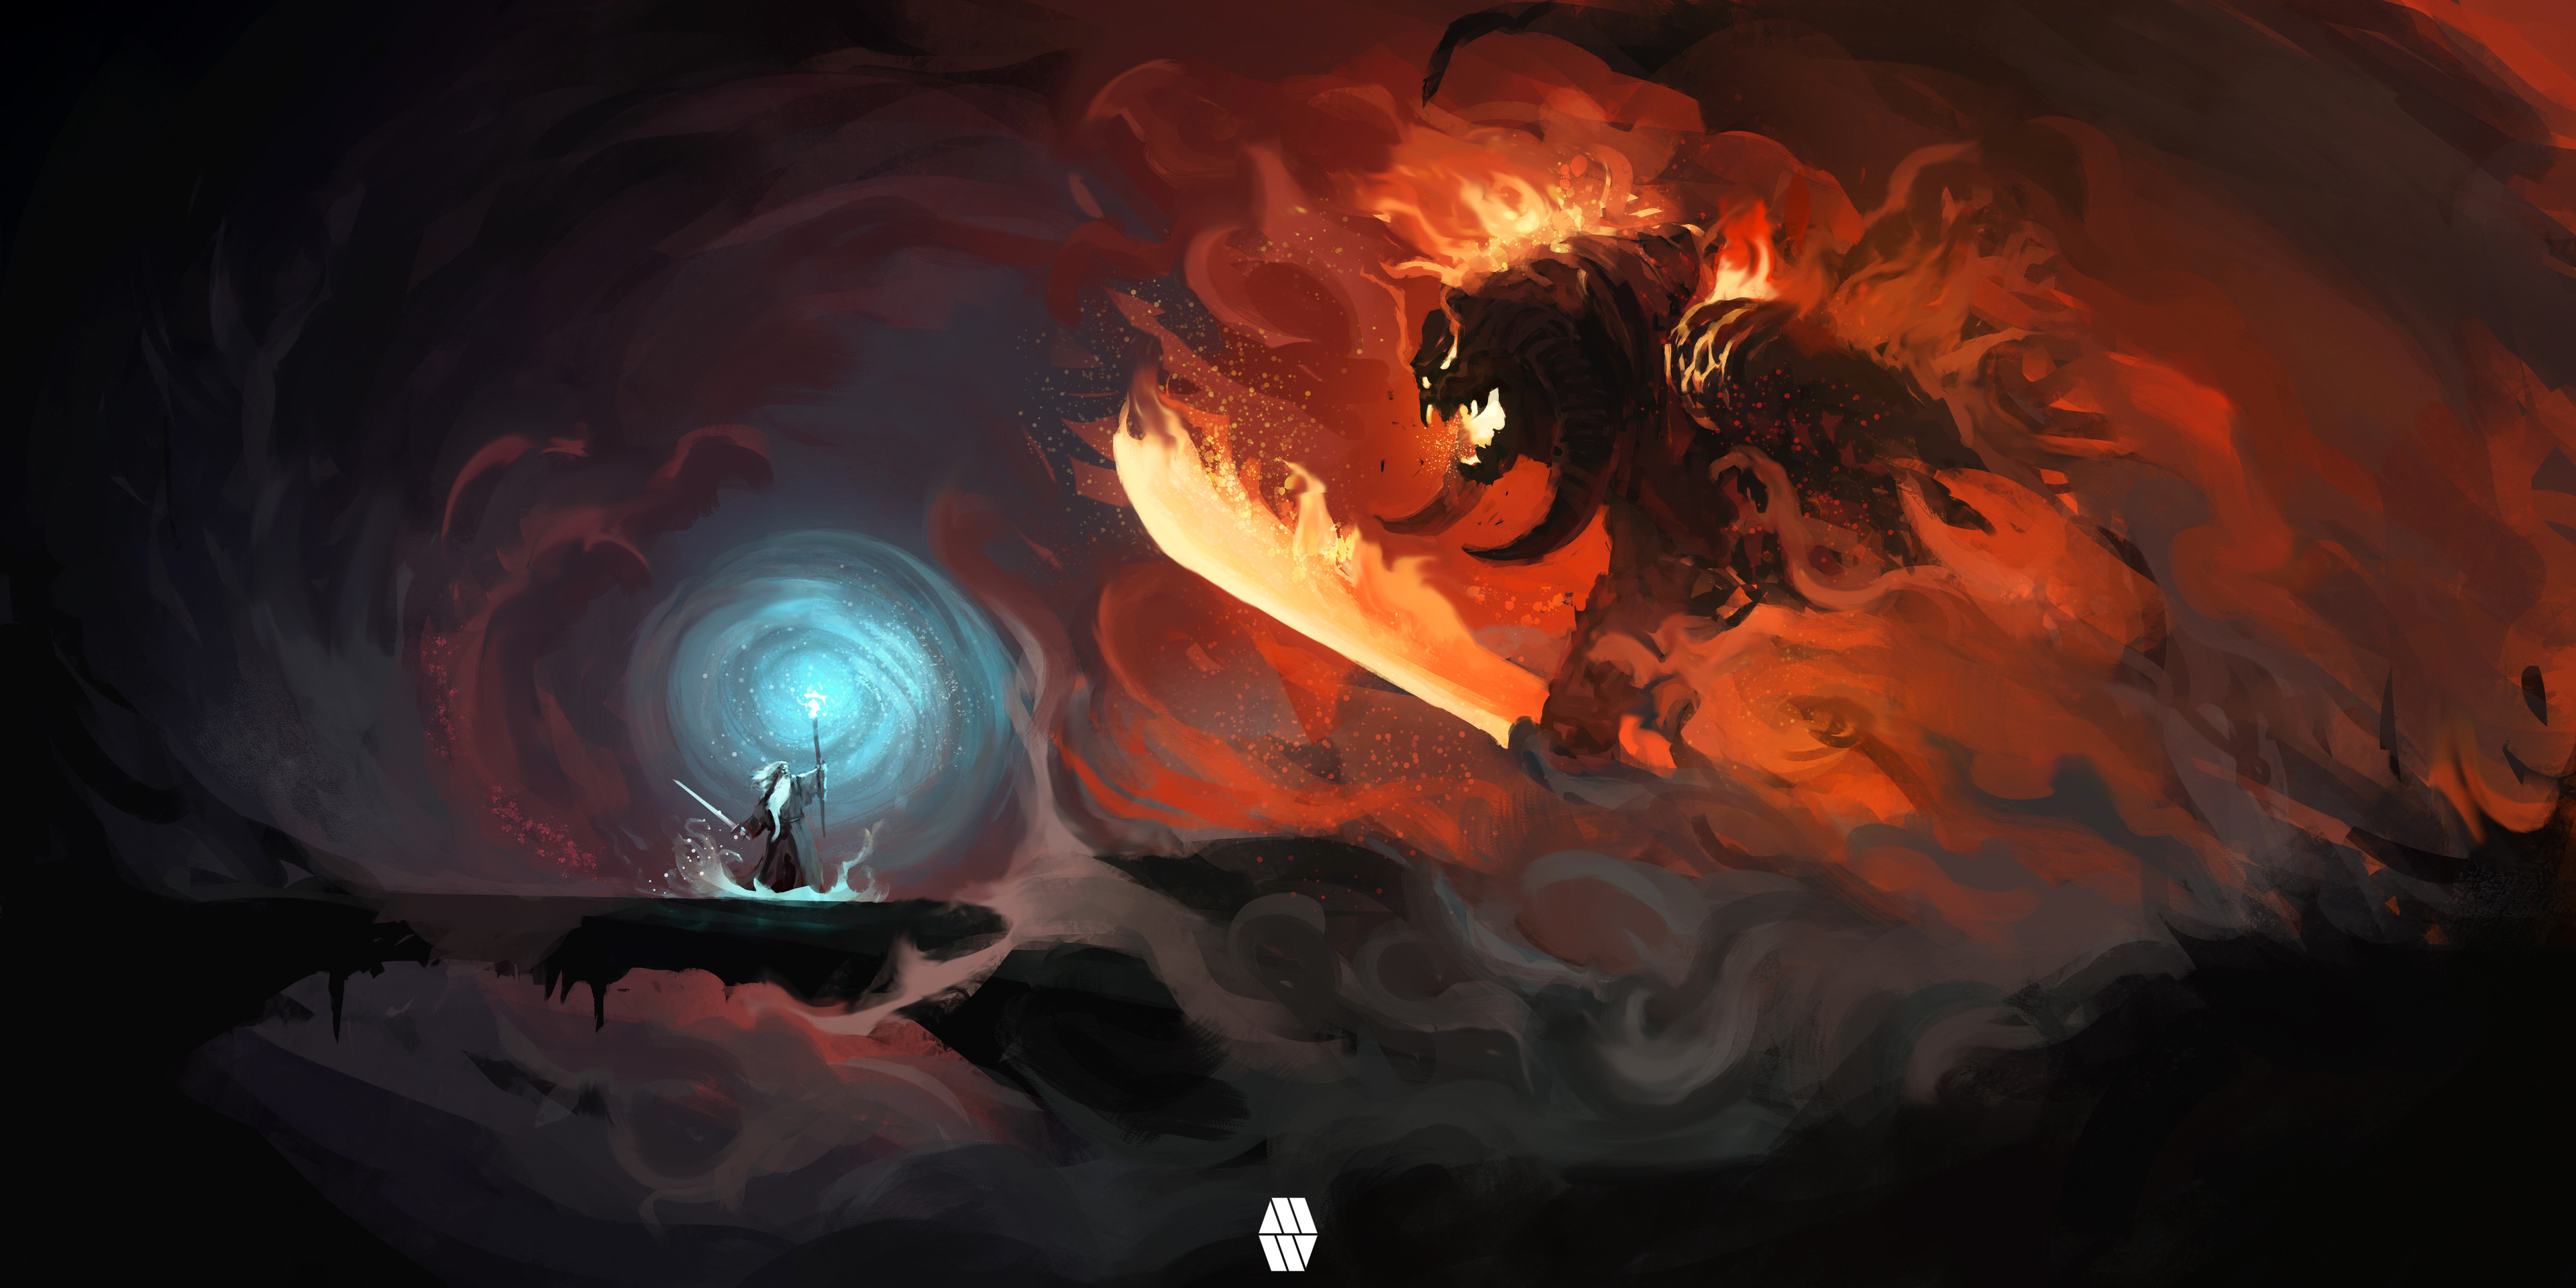 General 3840x1920 Marcus Whinney digital art The Lord of the Rings fan art Gandalf fighting Balrog creature fantasy art movie characters wizard movies watermarked